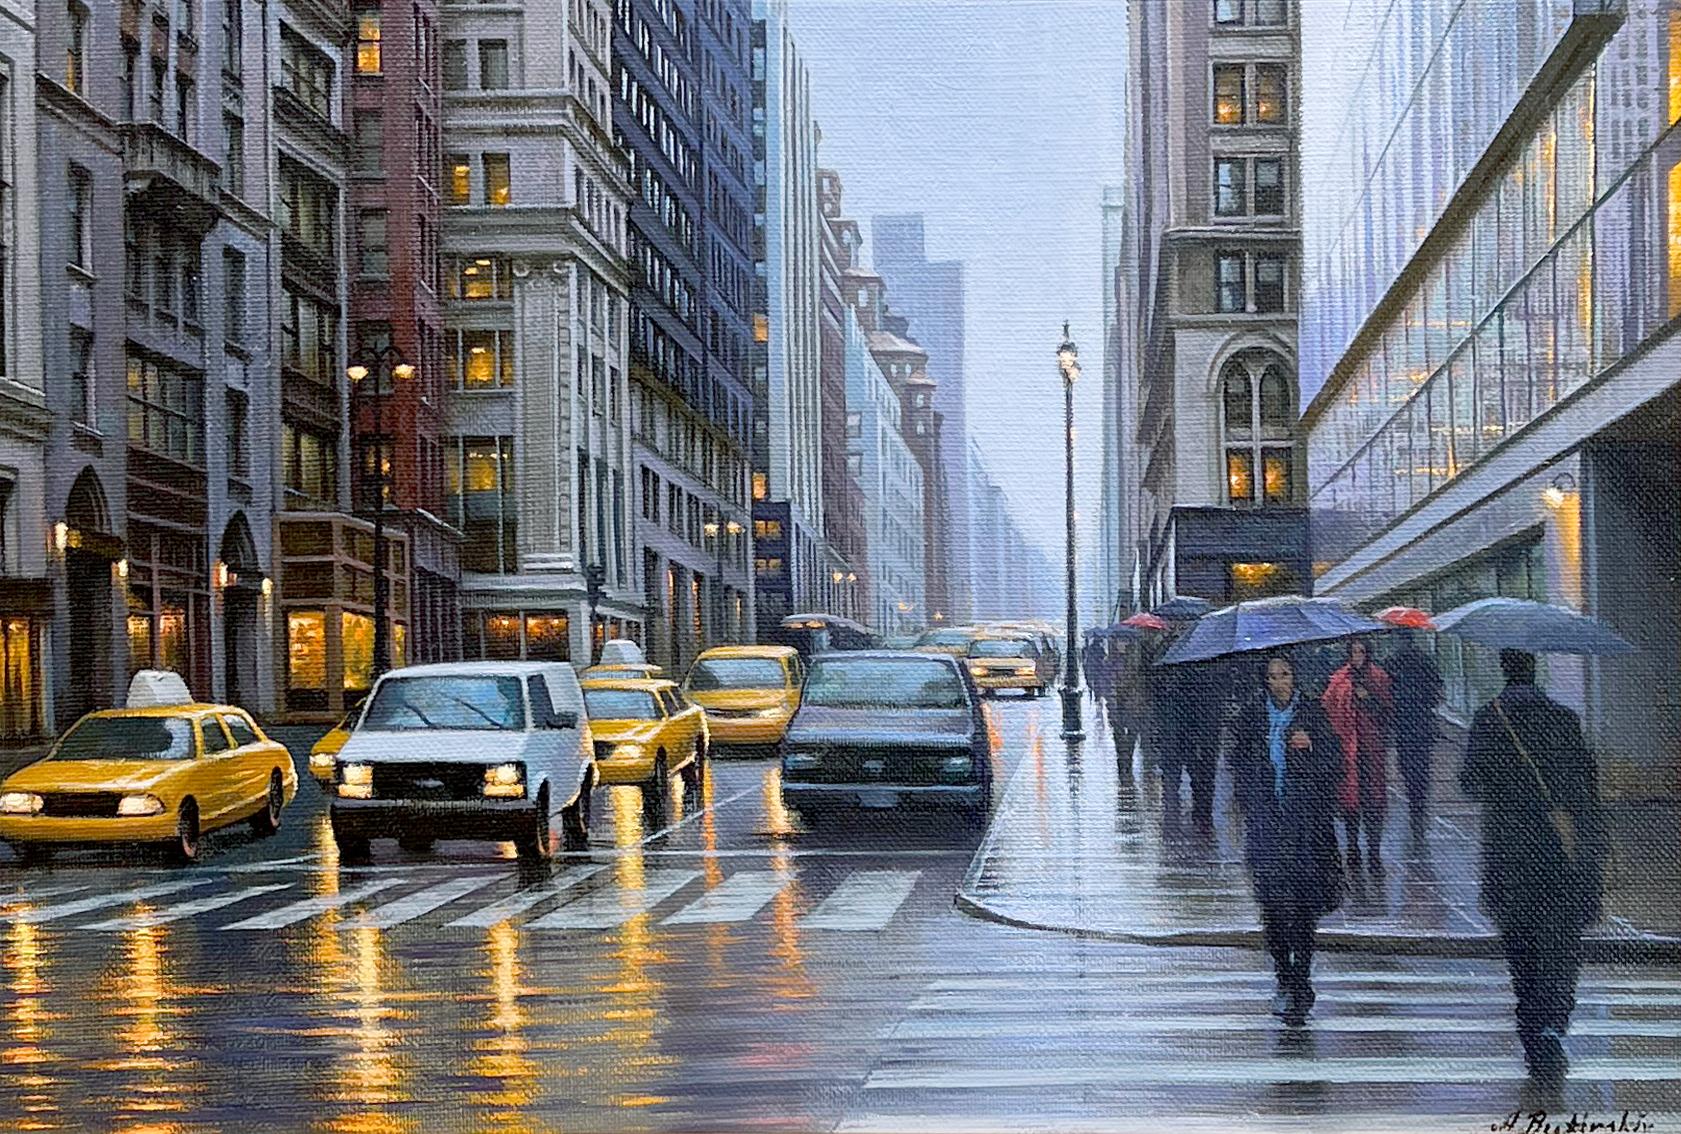 This piece, "N.Y. Cabbies", is a 14x20 landscape oil painting on canvas by artist Alexei Butirskiy featuring a view down a busy street in Manhattan, New York City on a rainy day. Pedestrians flock the sidewalks under soaked umbrellas while bustling